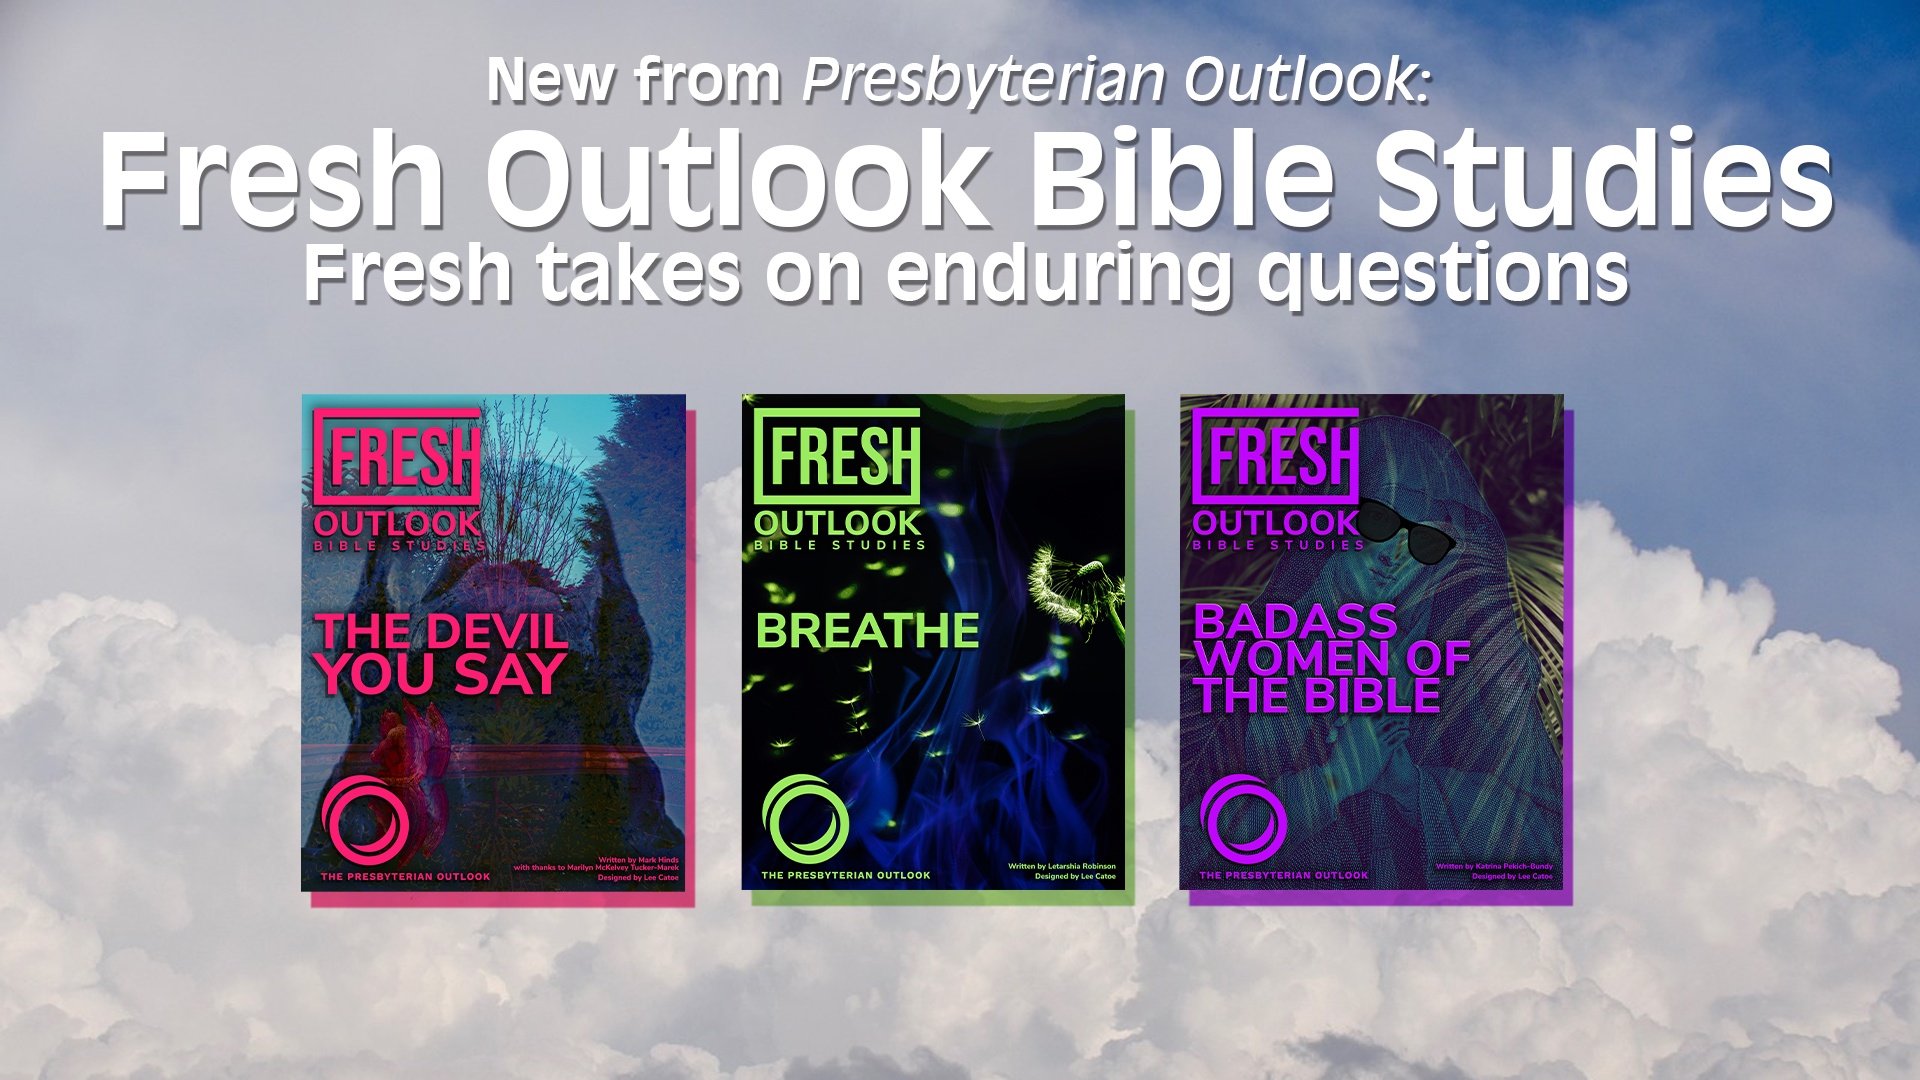 New Young Adult Bible Study by The Presbyterian Outlook